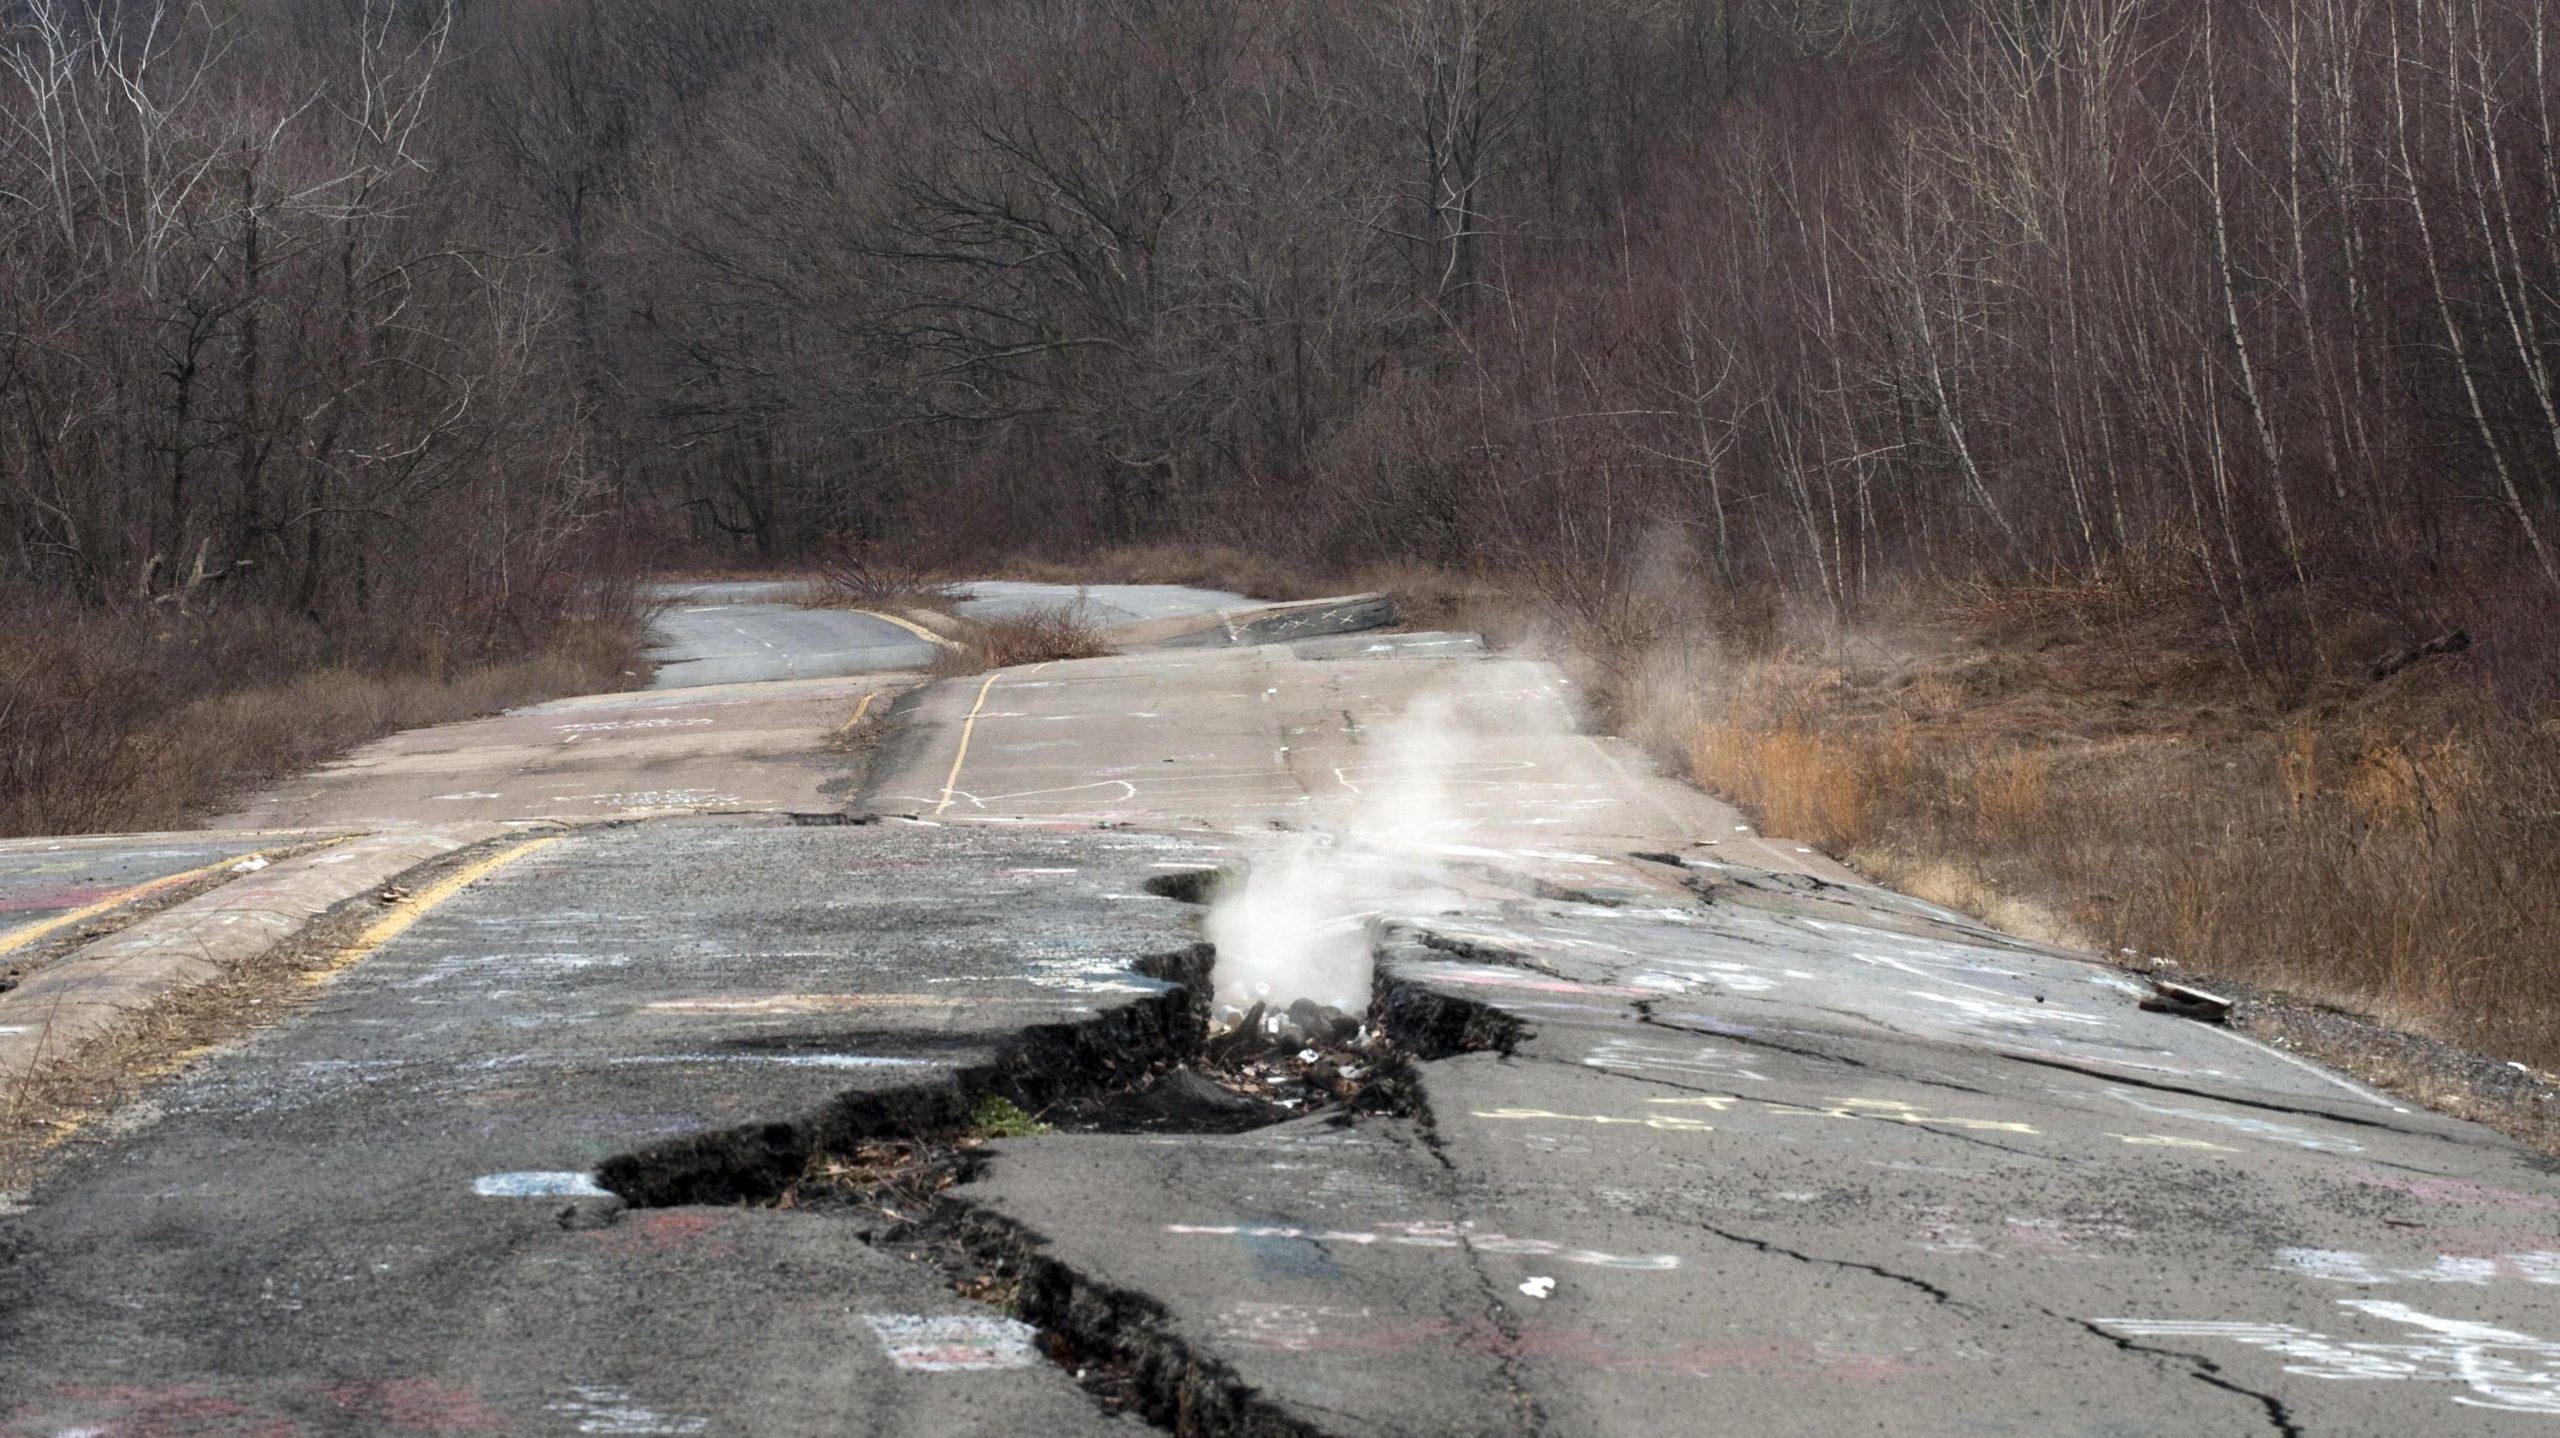 Smoke rises from a large crack in Pennsylvania Highway 61, caused by the underground coal fire. (Photo: Don Emmert/AFP, Getty Images)